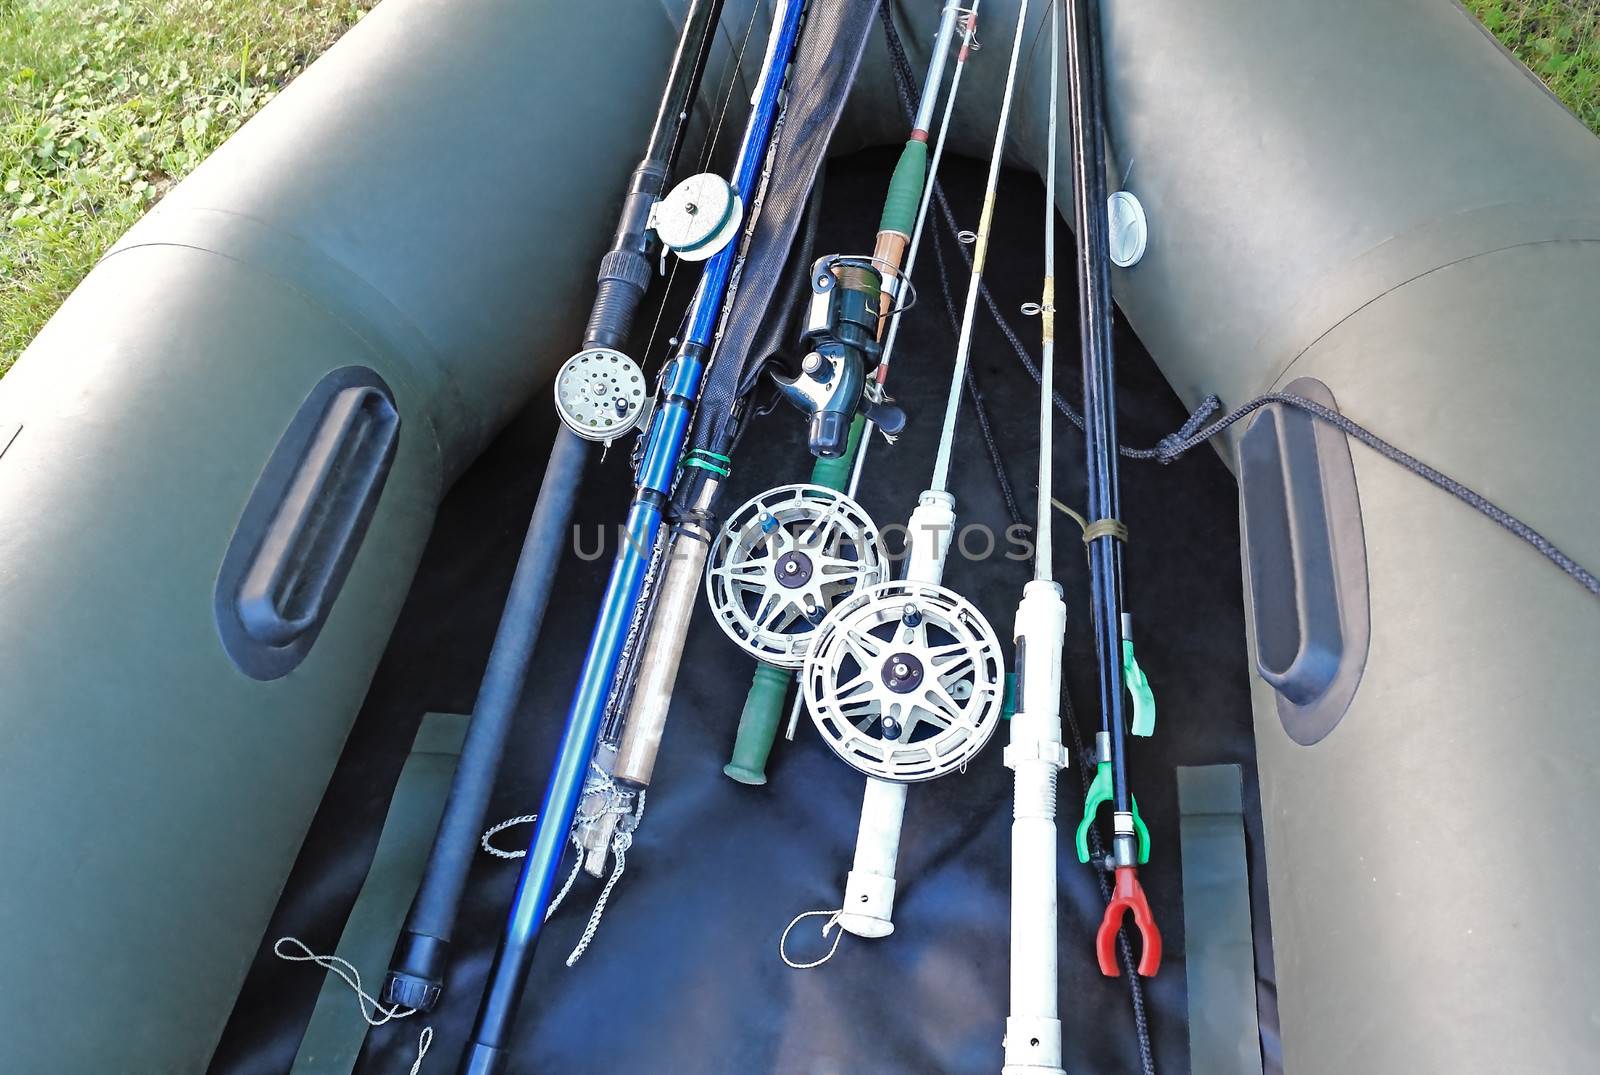 Rods and spinning prepared for fishing, lie in pressurized rubber boat